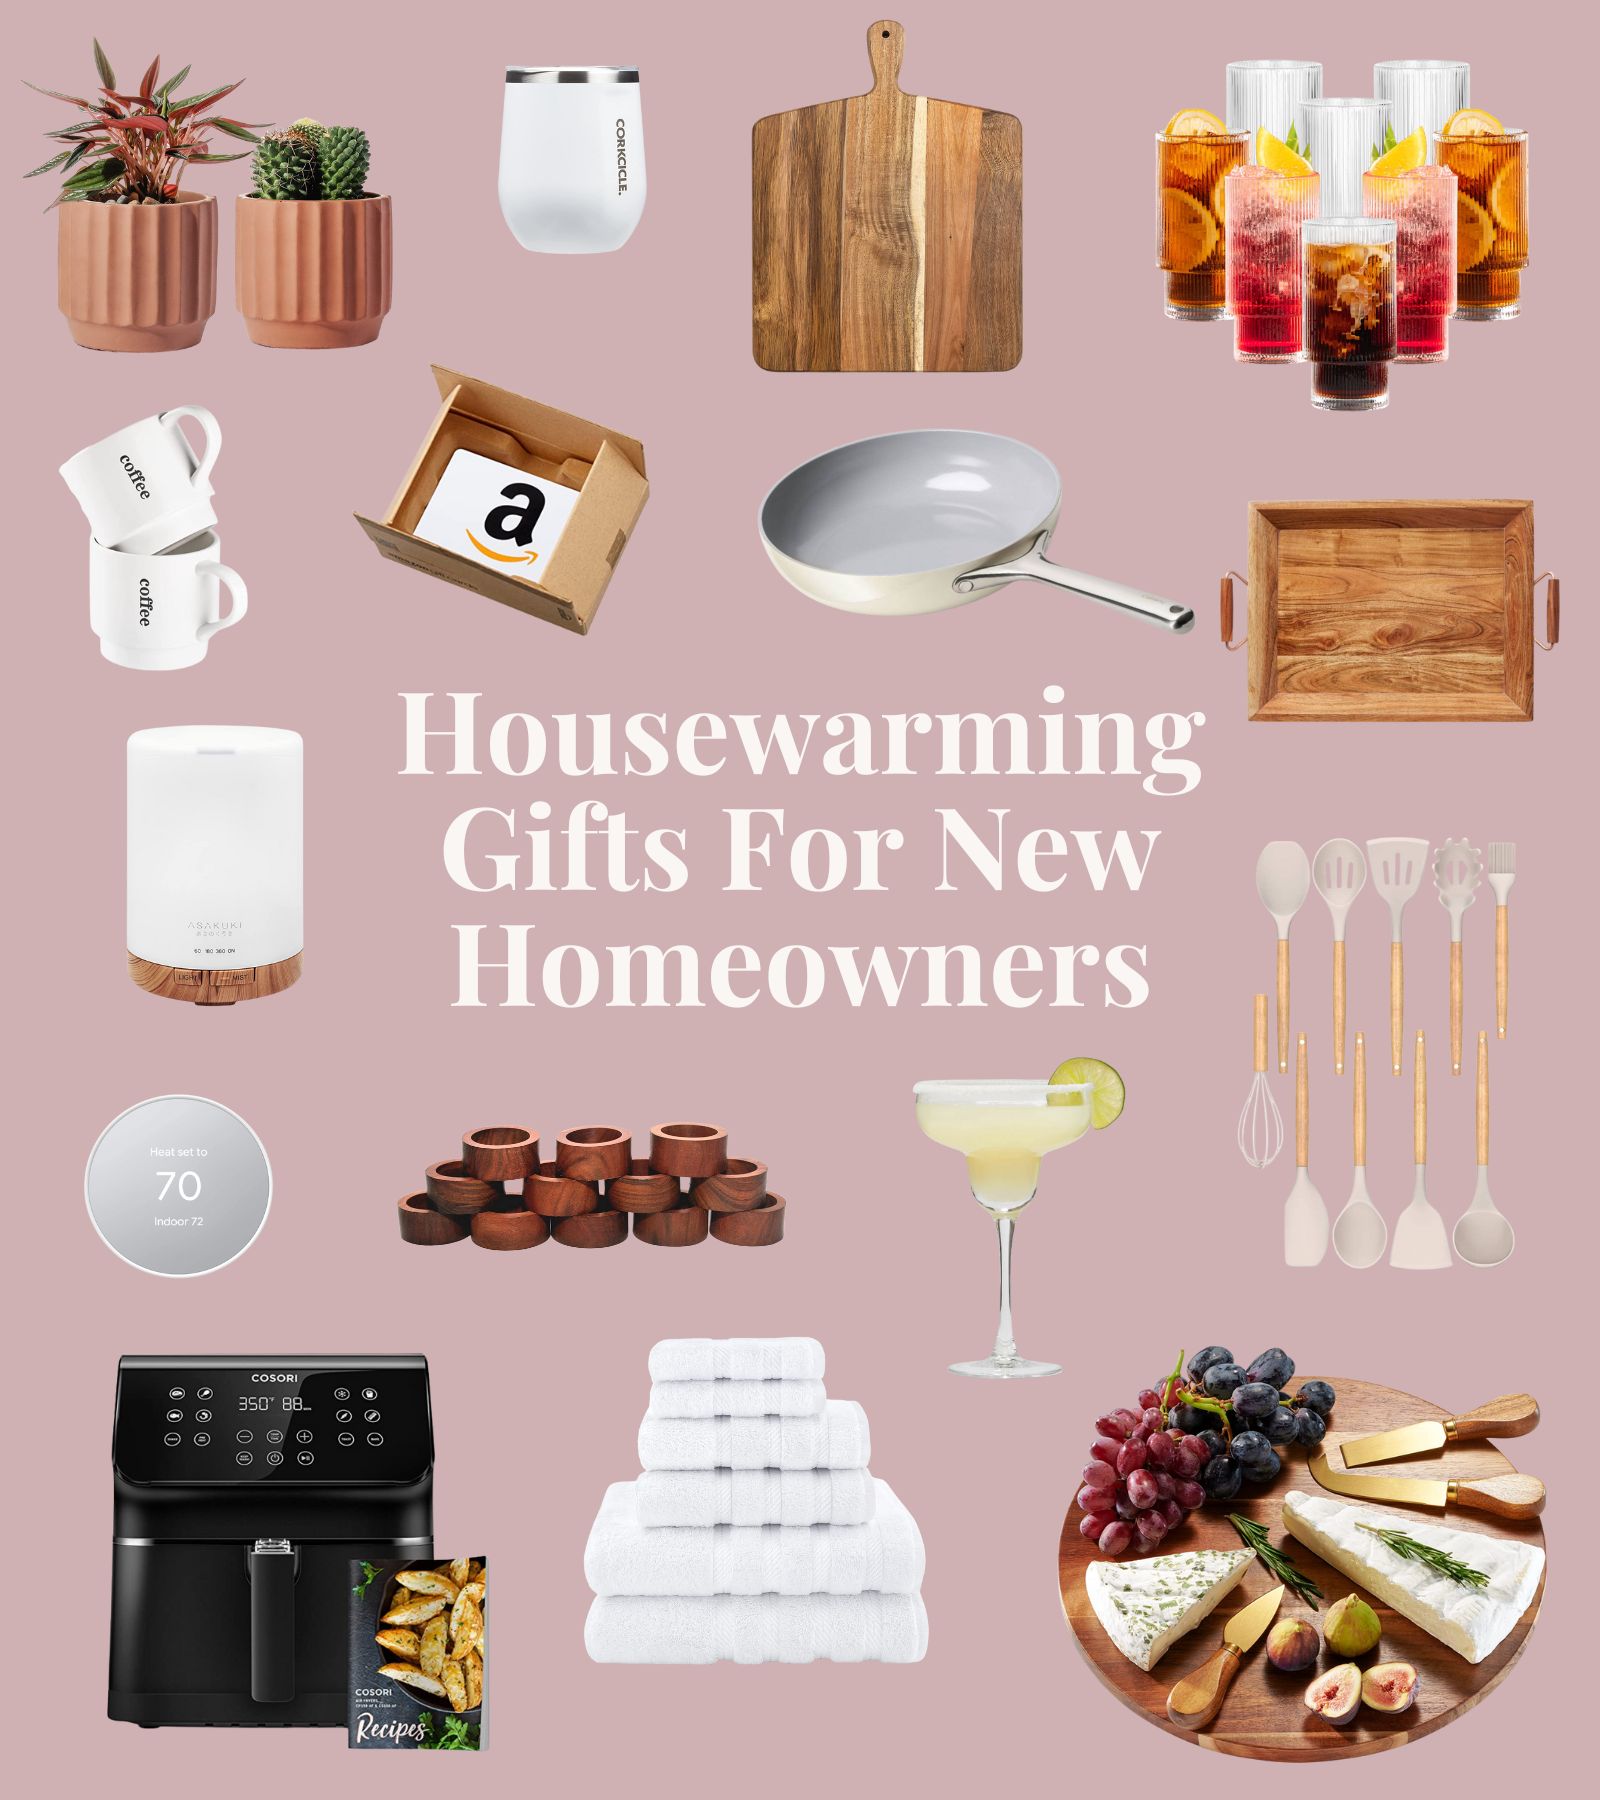 5 practical housewarming gifts new homeowners wouldn't mind receiving -  Home & Decor Singapore